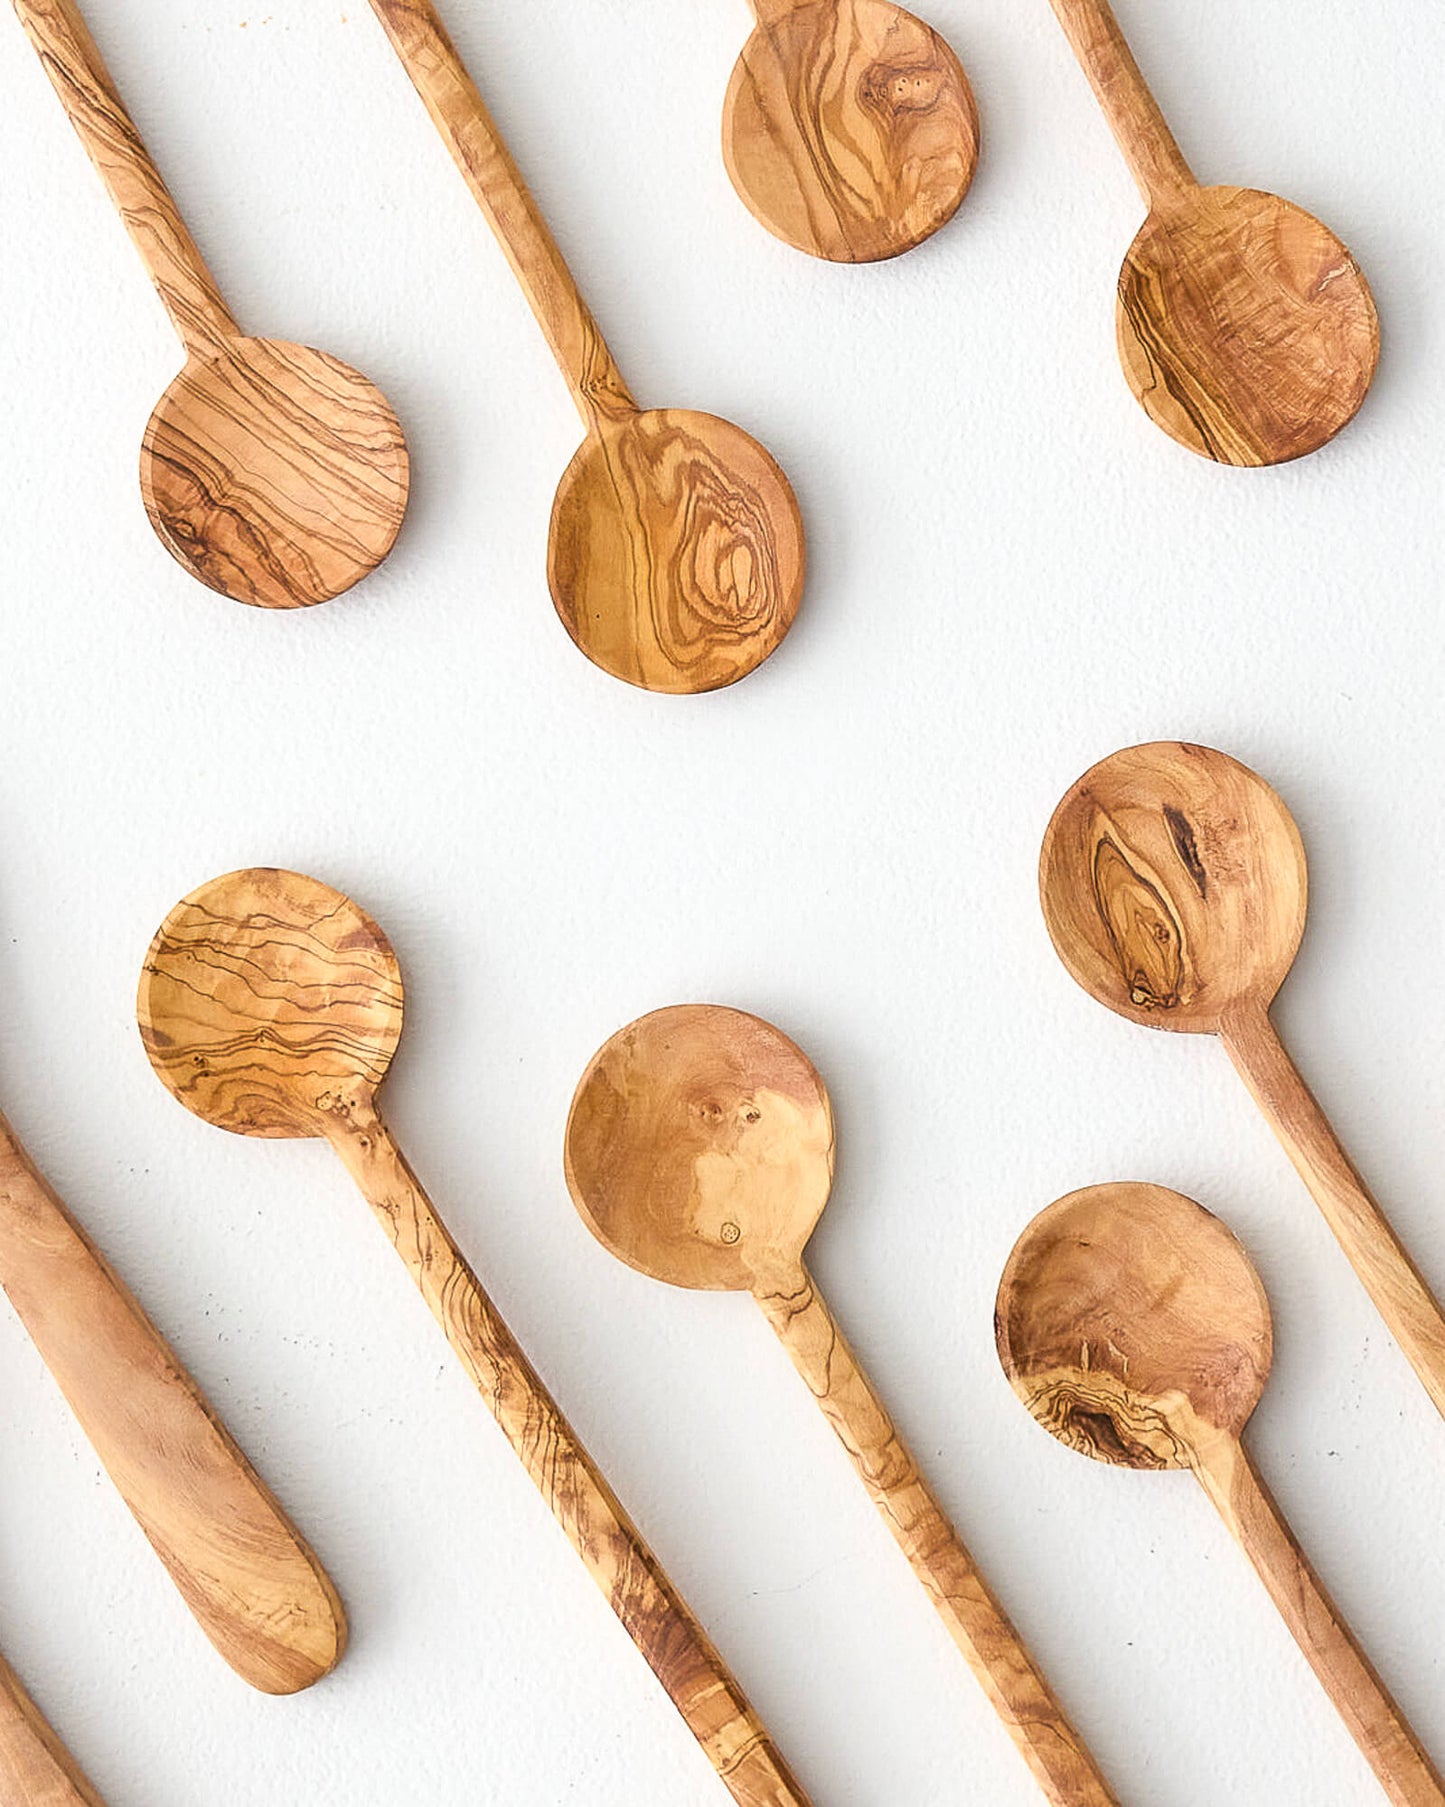 
                  
                    Variety of handcrafted olive wood spoons by Fairkind.
                  
                